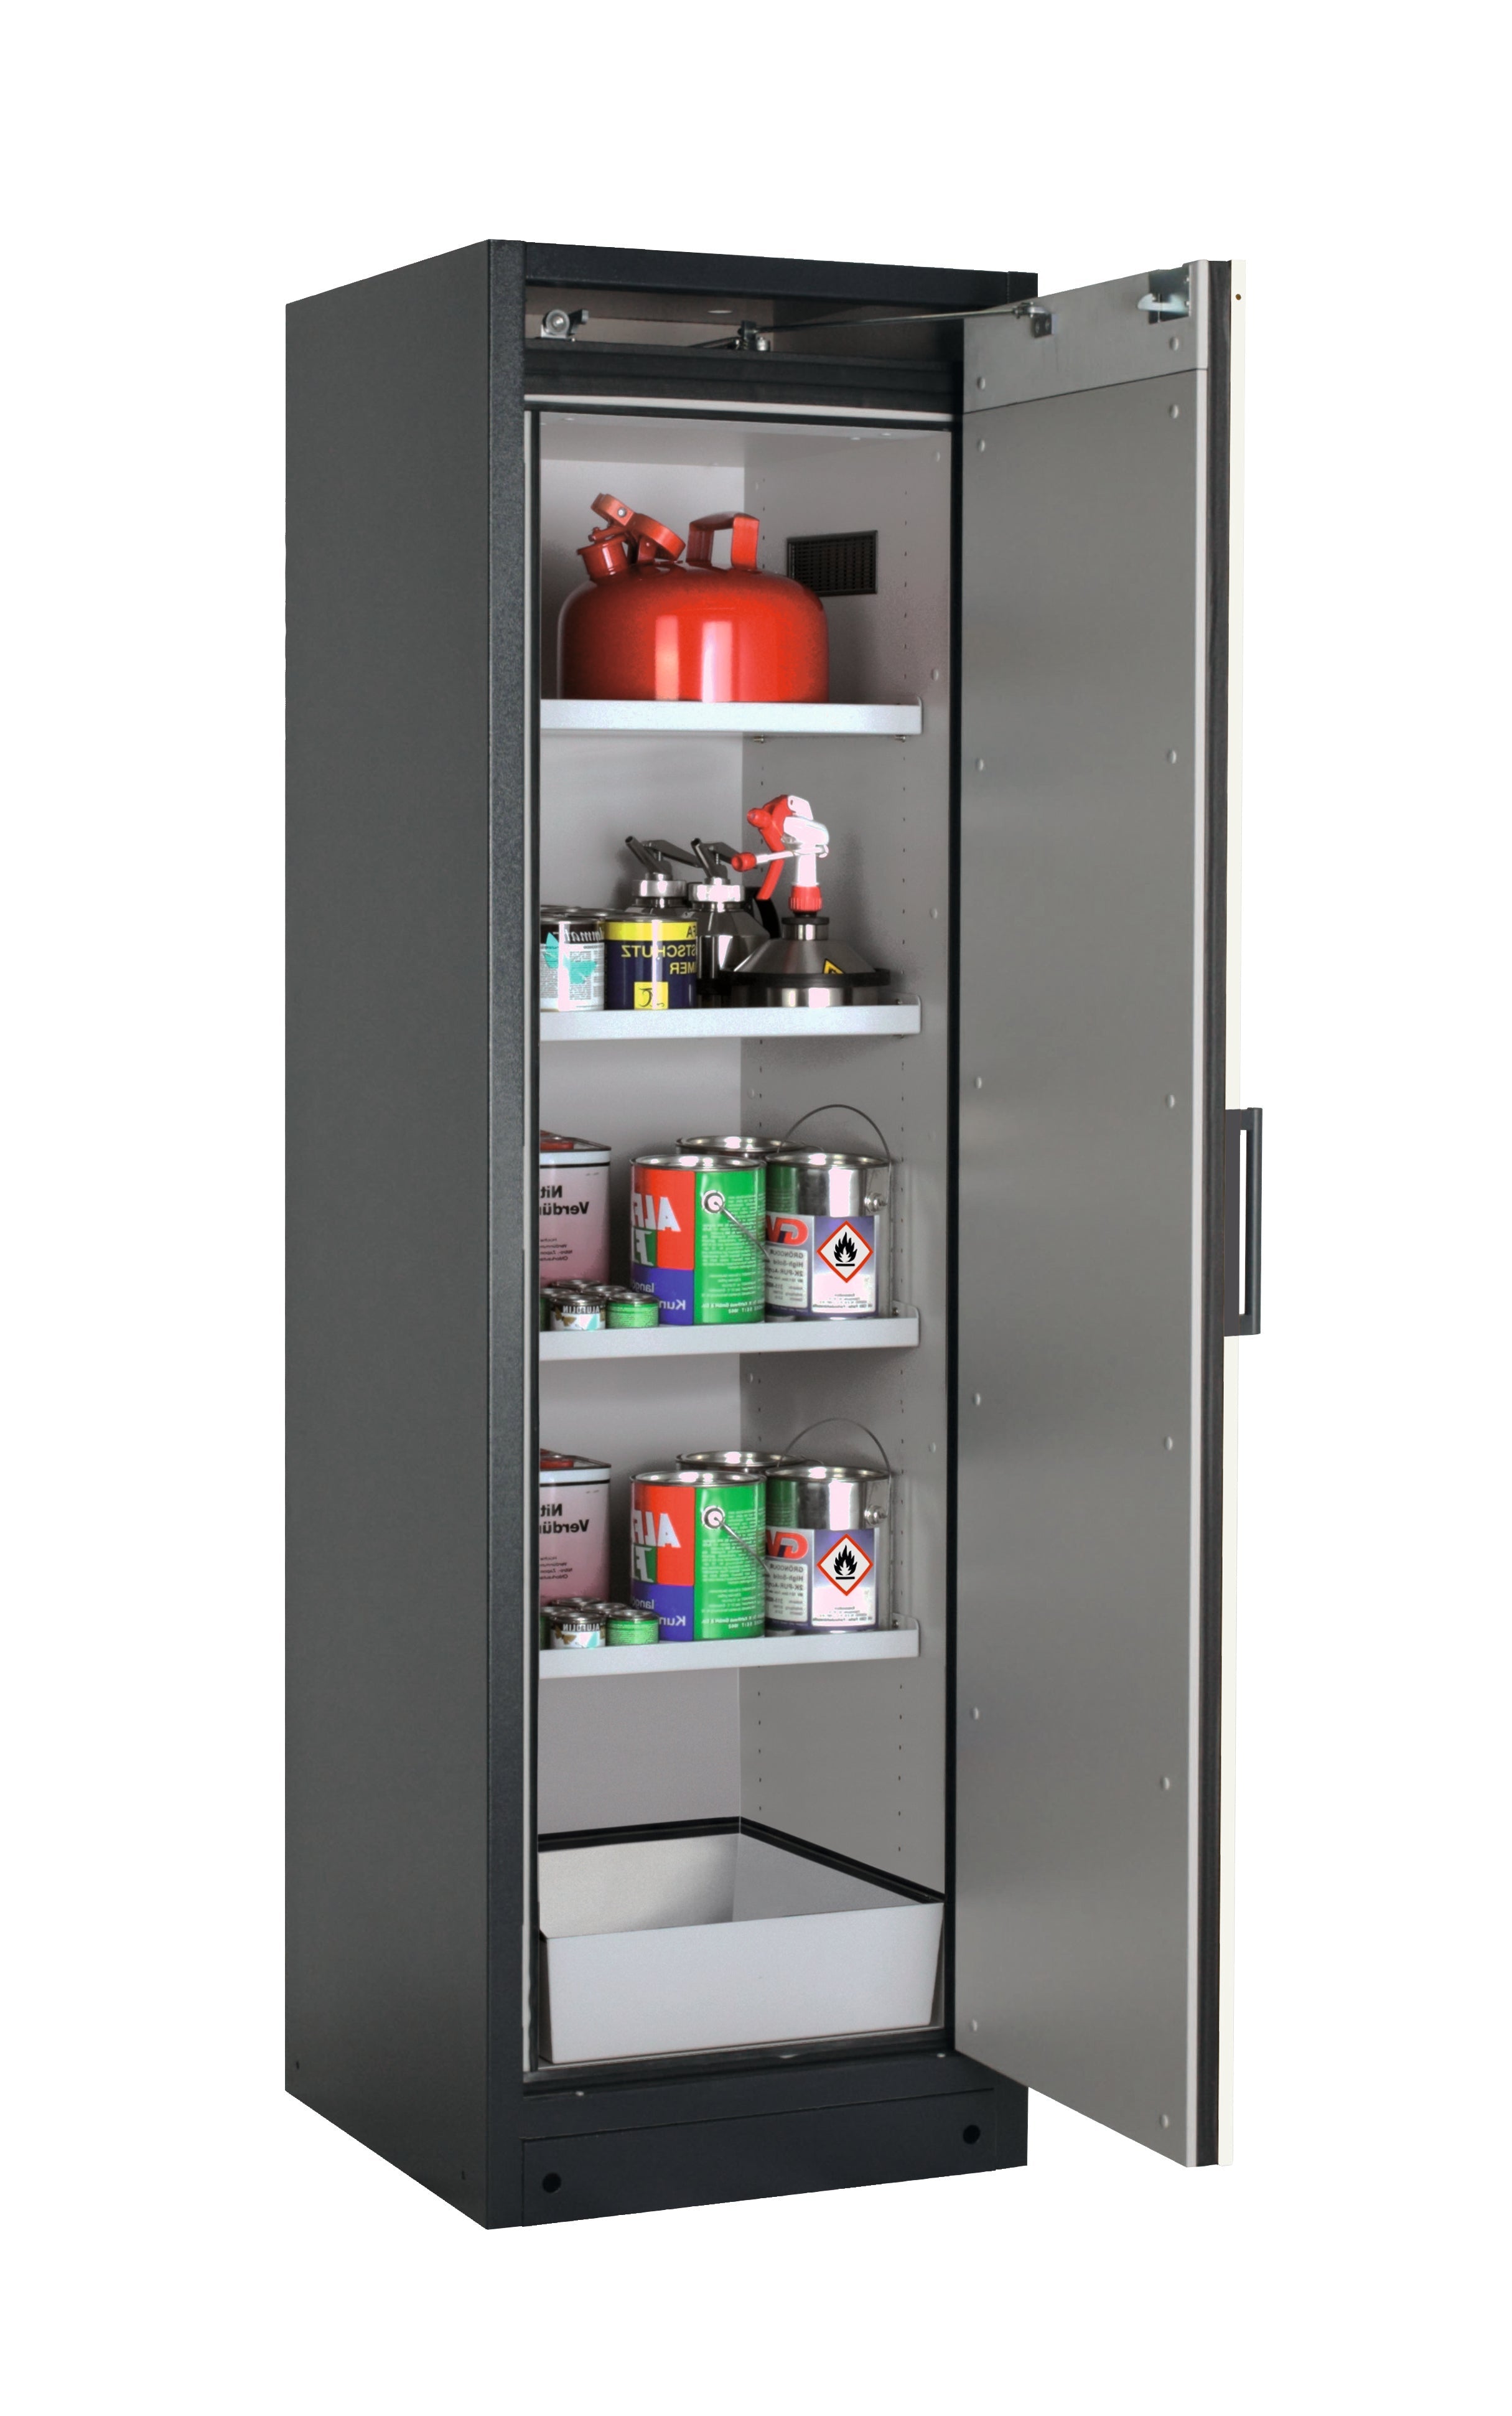 Type 90 safety storage cabinet Q-CLASSIC-90 model Q90.195.060.R in asecos silver with 4x shelf standard (sheet steel),